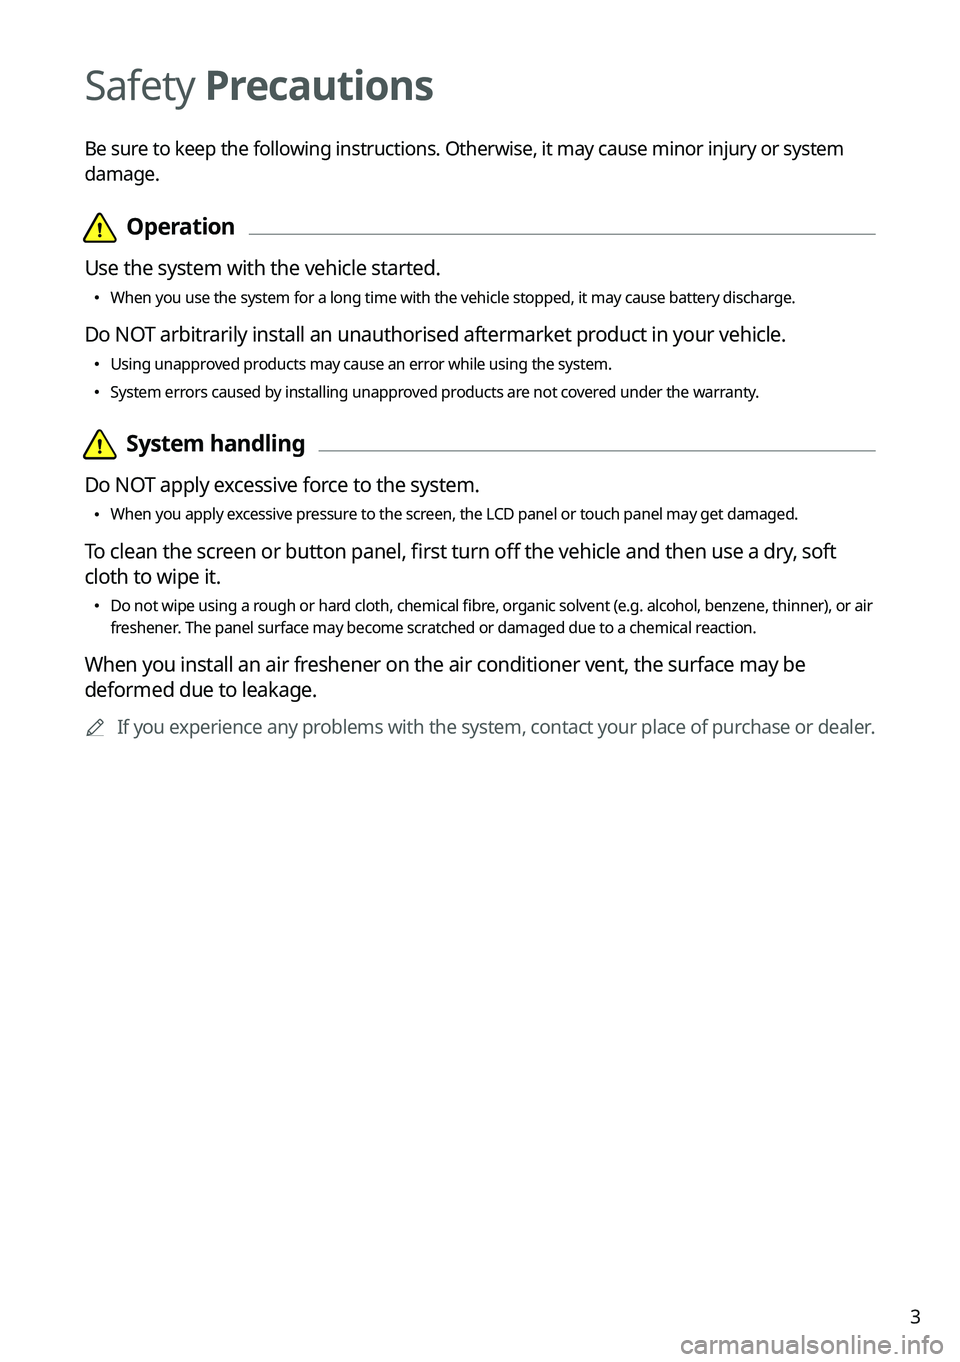 KIA NIRO 2022  Navigation System Quick Reference Guide 3
Safety Precautions
Be sure to keep the following instructions. Otherwise, it may cause minor injury or system 
damage. 
  